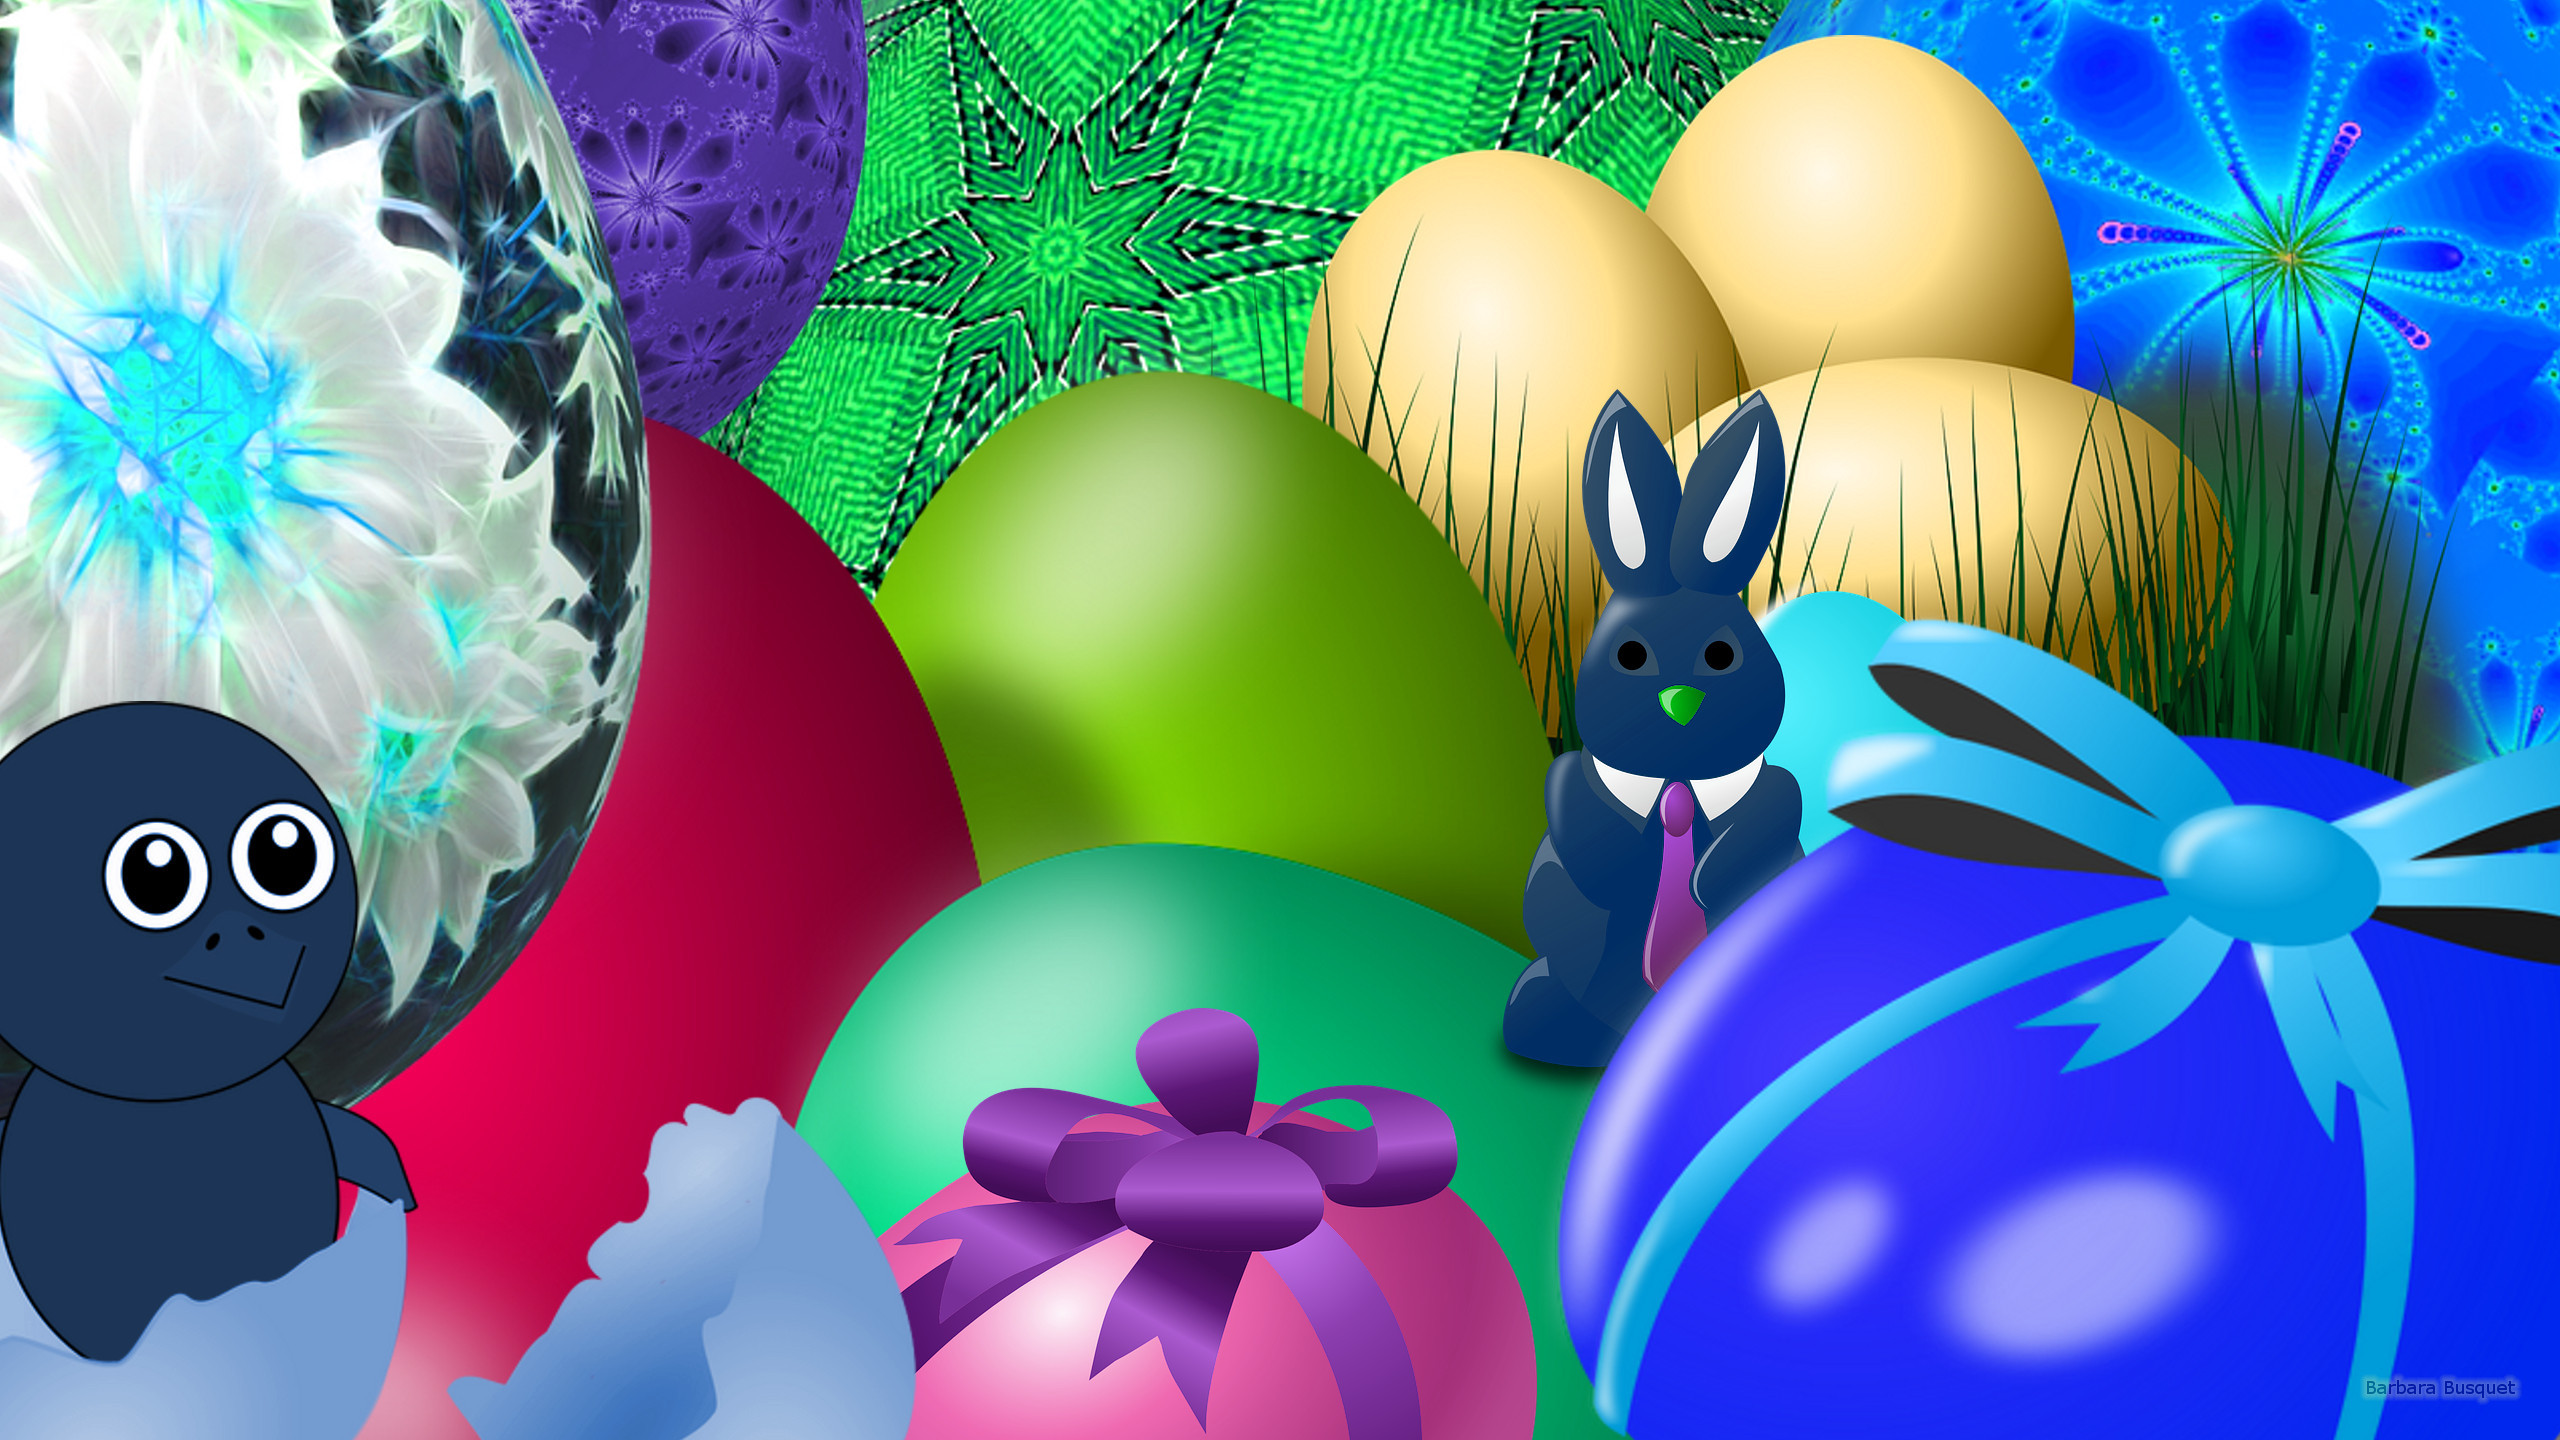 2560x1440 Easter wallpaper with bunny and chicken.